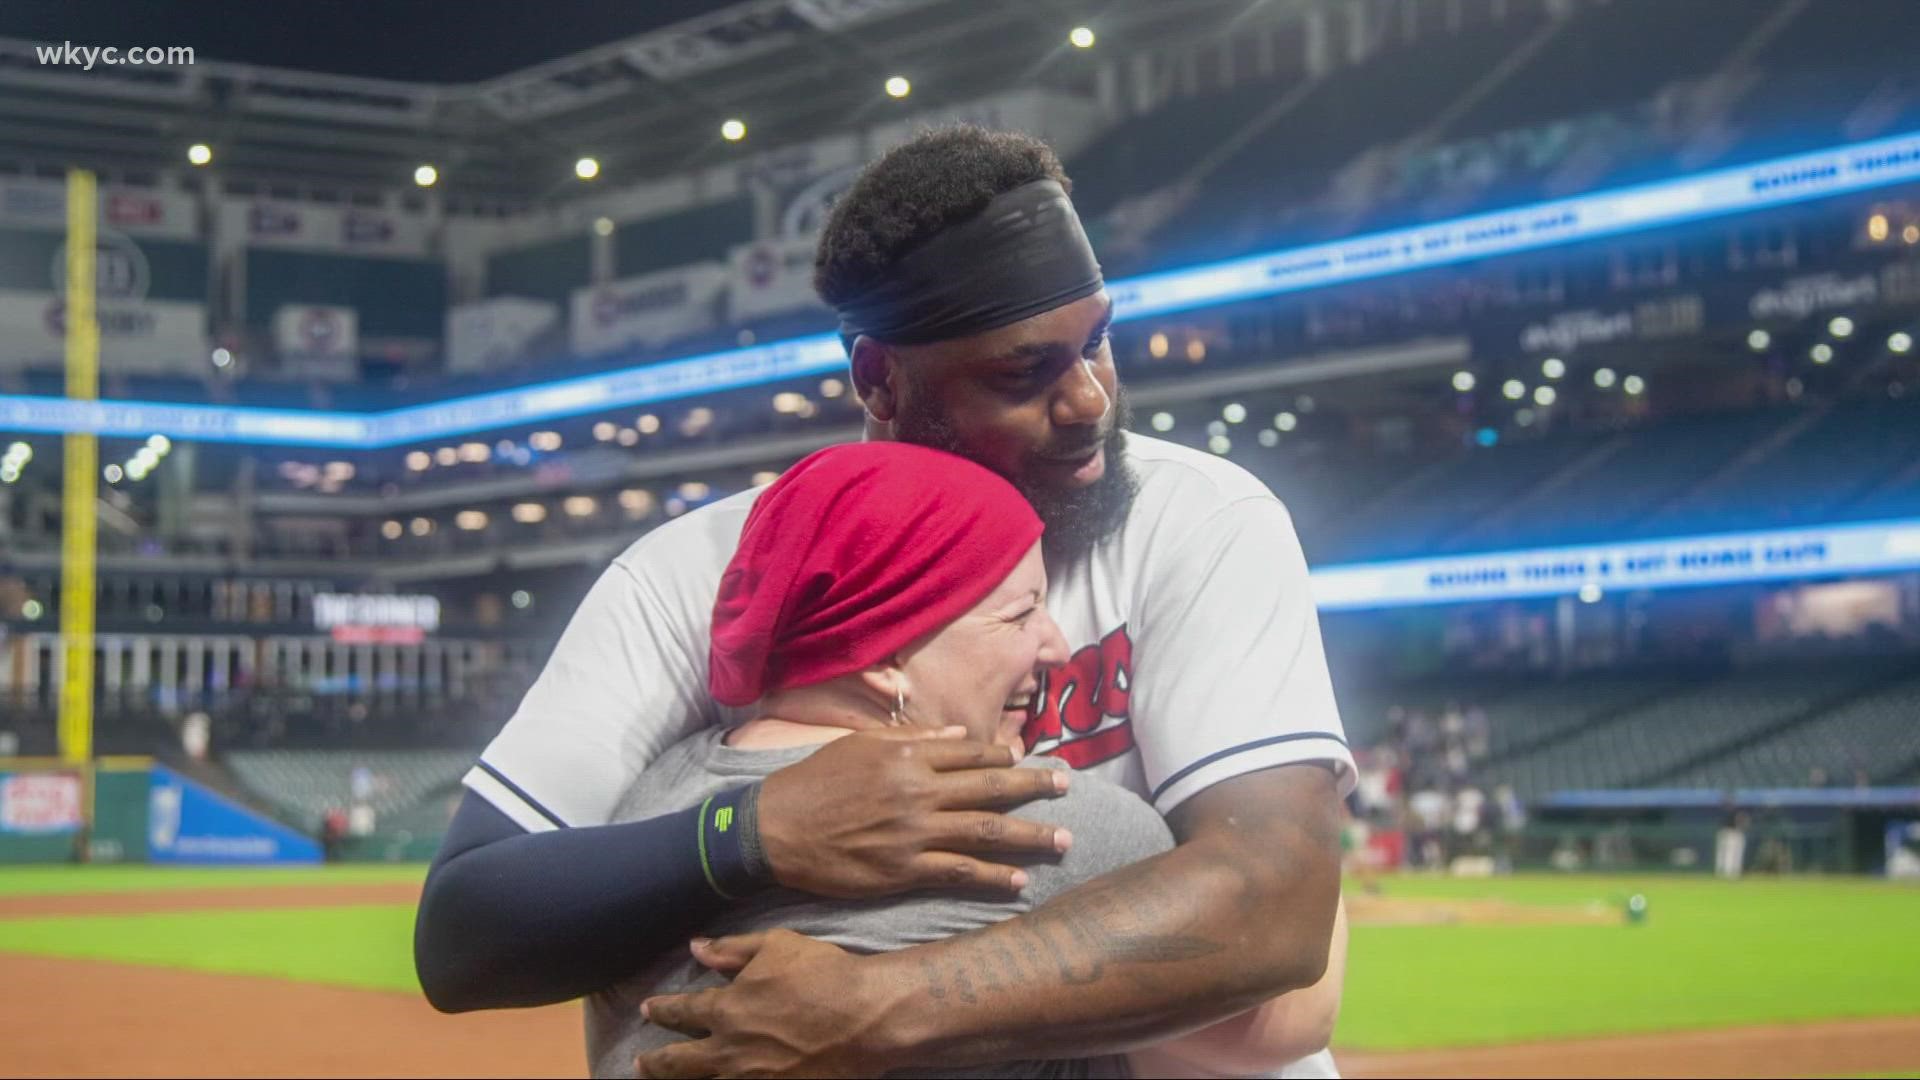 One Cleveland Indians fan was in for a surprise at Wednesday's game when Franmil Reyes surprised her with a message. The fan, who is battling cancer, was in awe.